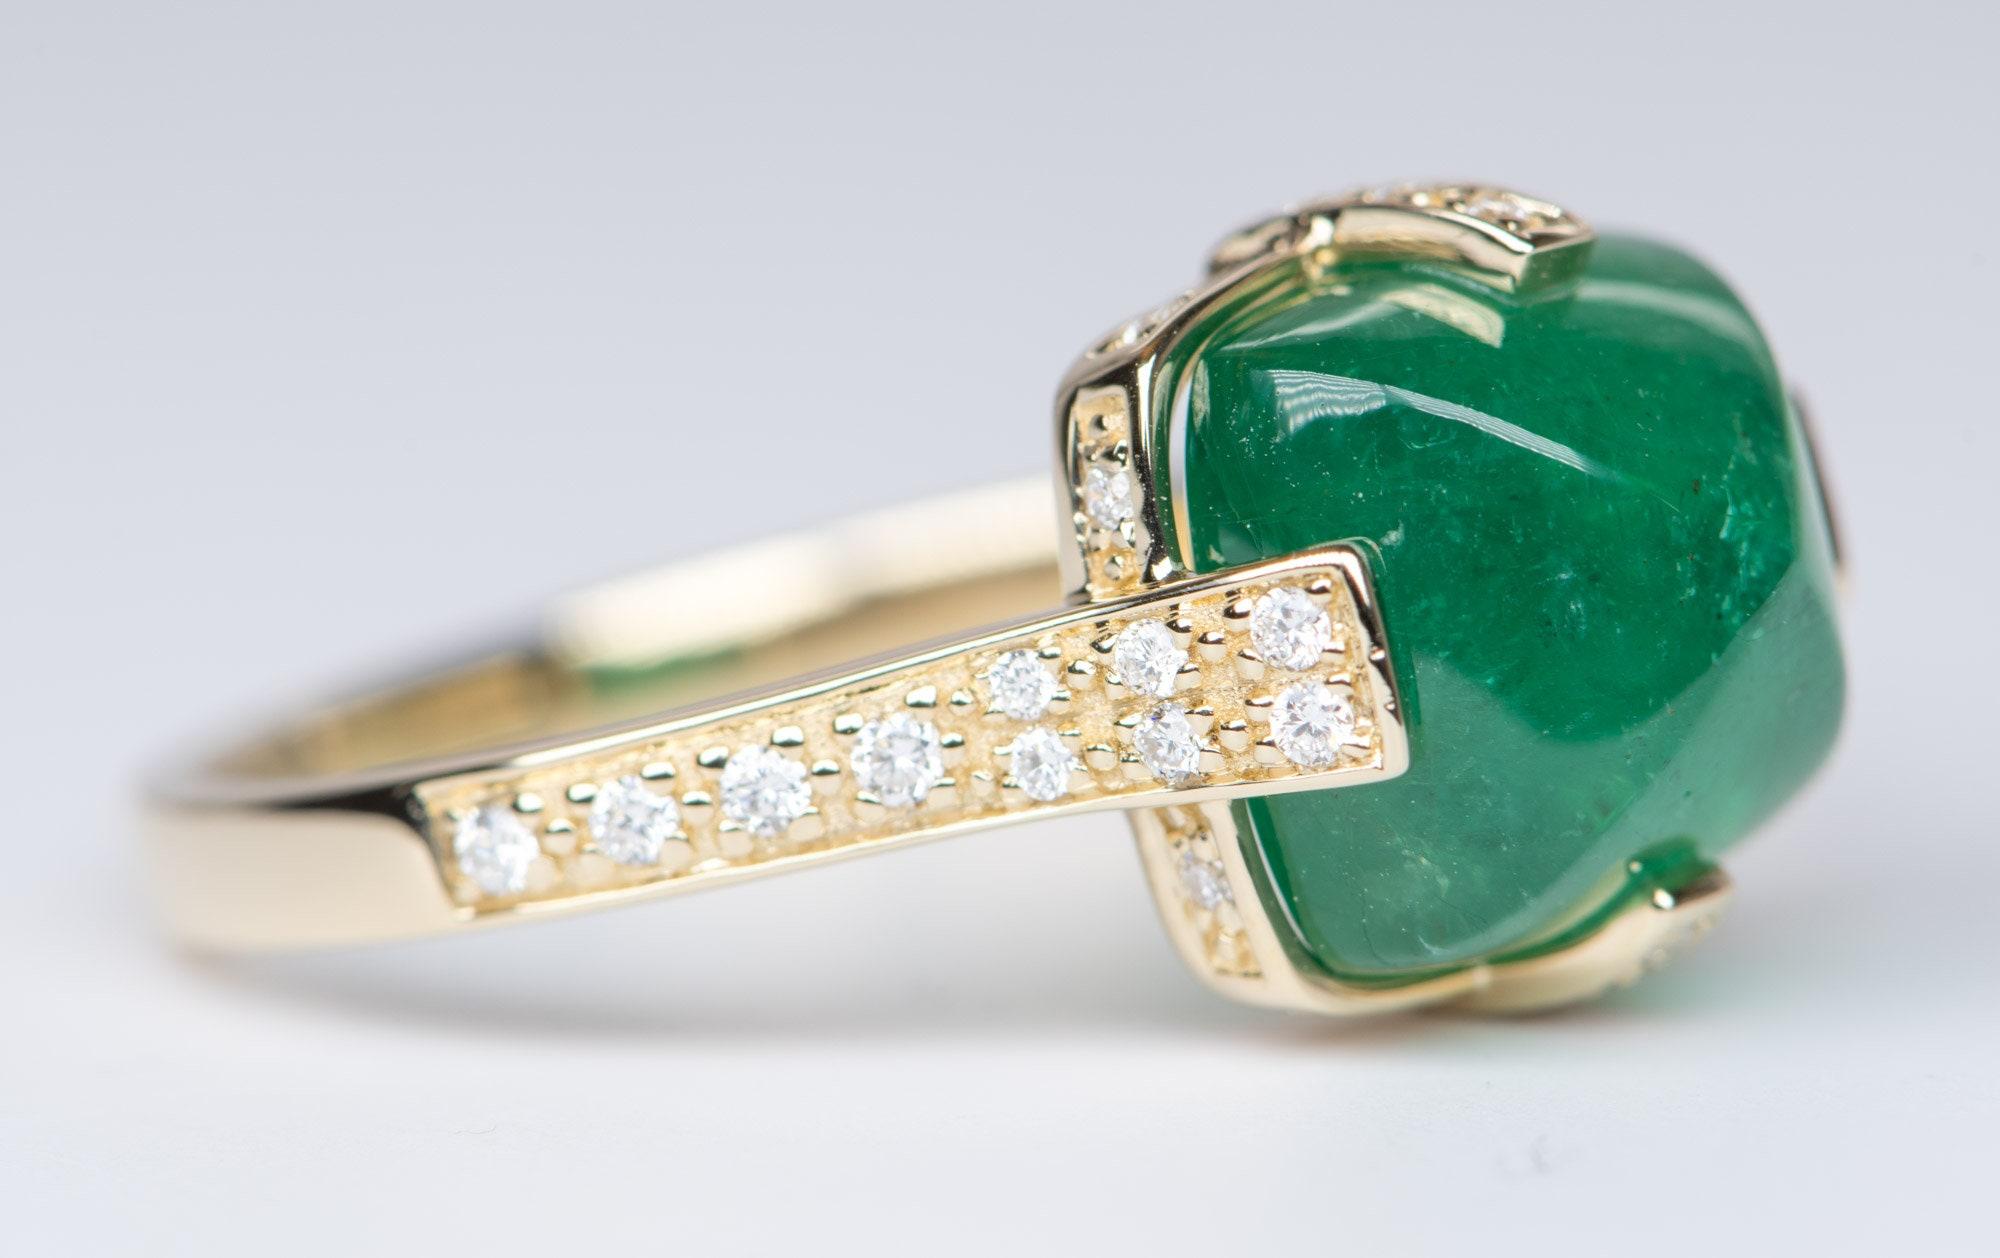 ♥ Solid 14K yellow gold ring featuring a unique sugarloaf emerald with a diamond pave band
♥ The overall setting measures 11.2mm in width, 11.2mm in length, and sits 8mm tall from the finger

♥ US Size 7 (Free resizing up or down one size)
♥ Band